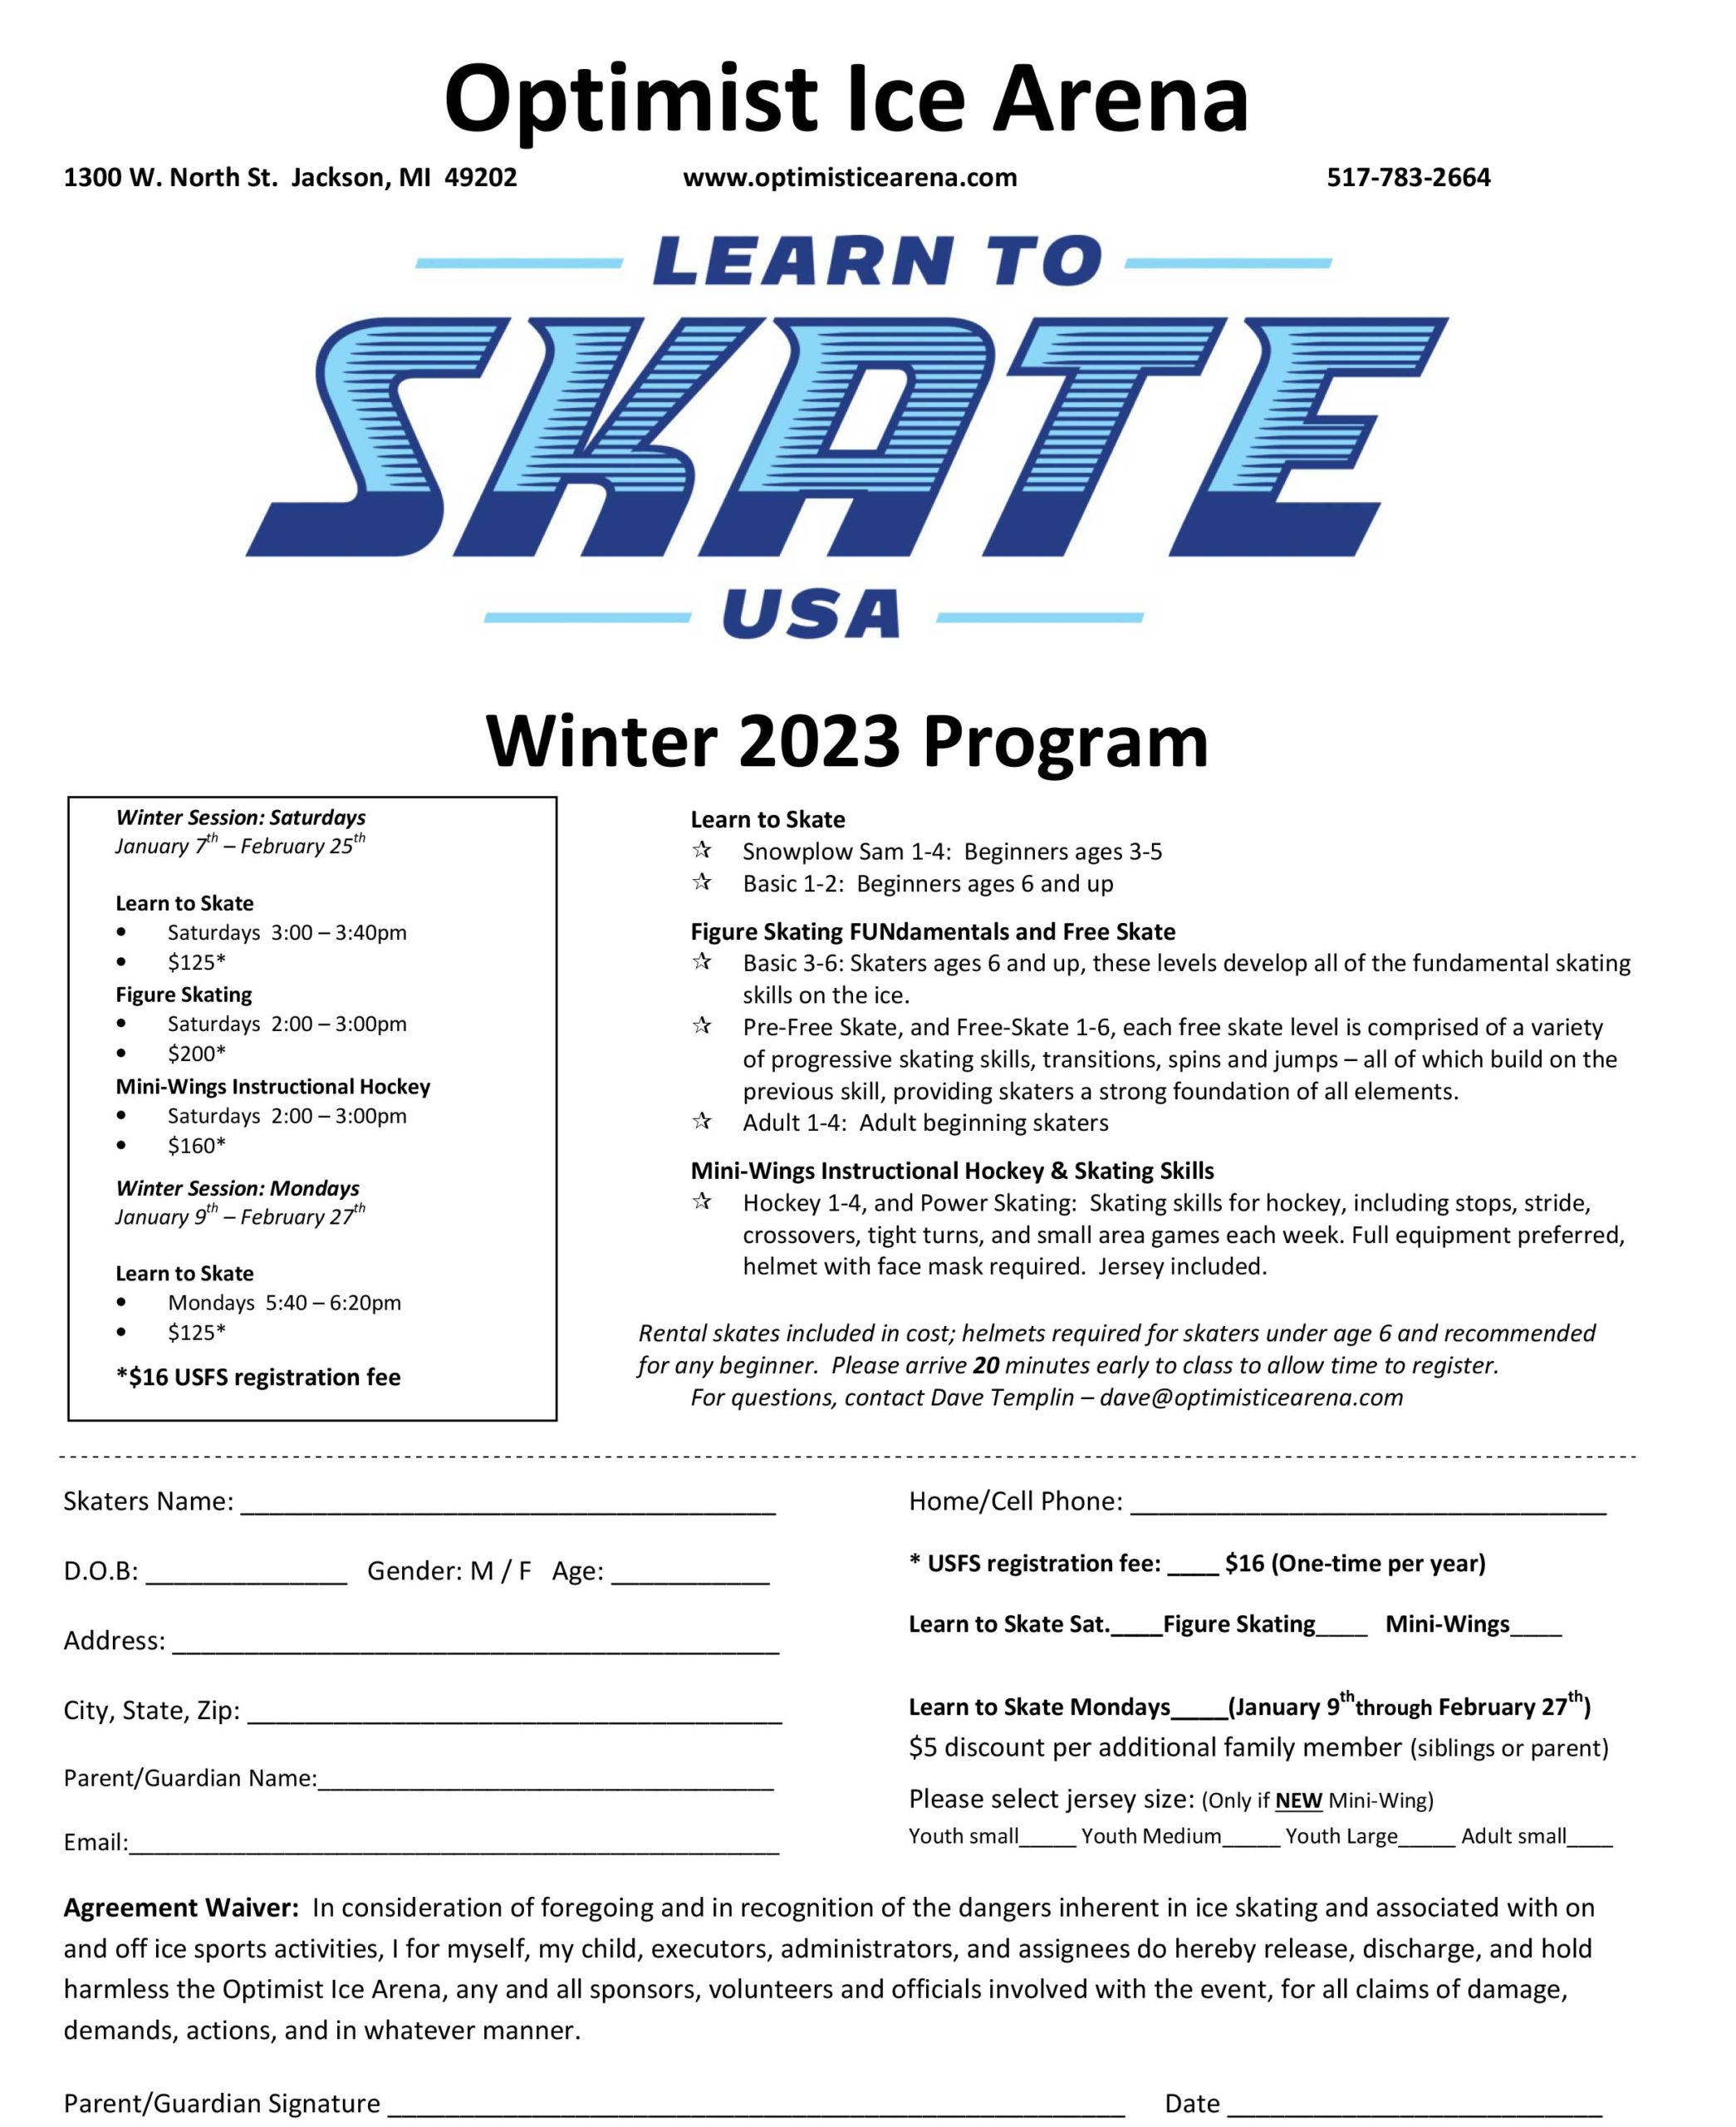 December & Learn to Skate Schedule Posted